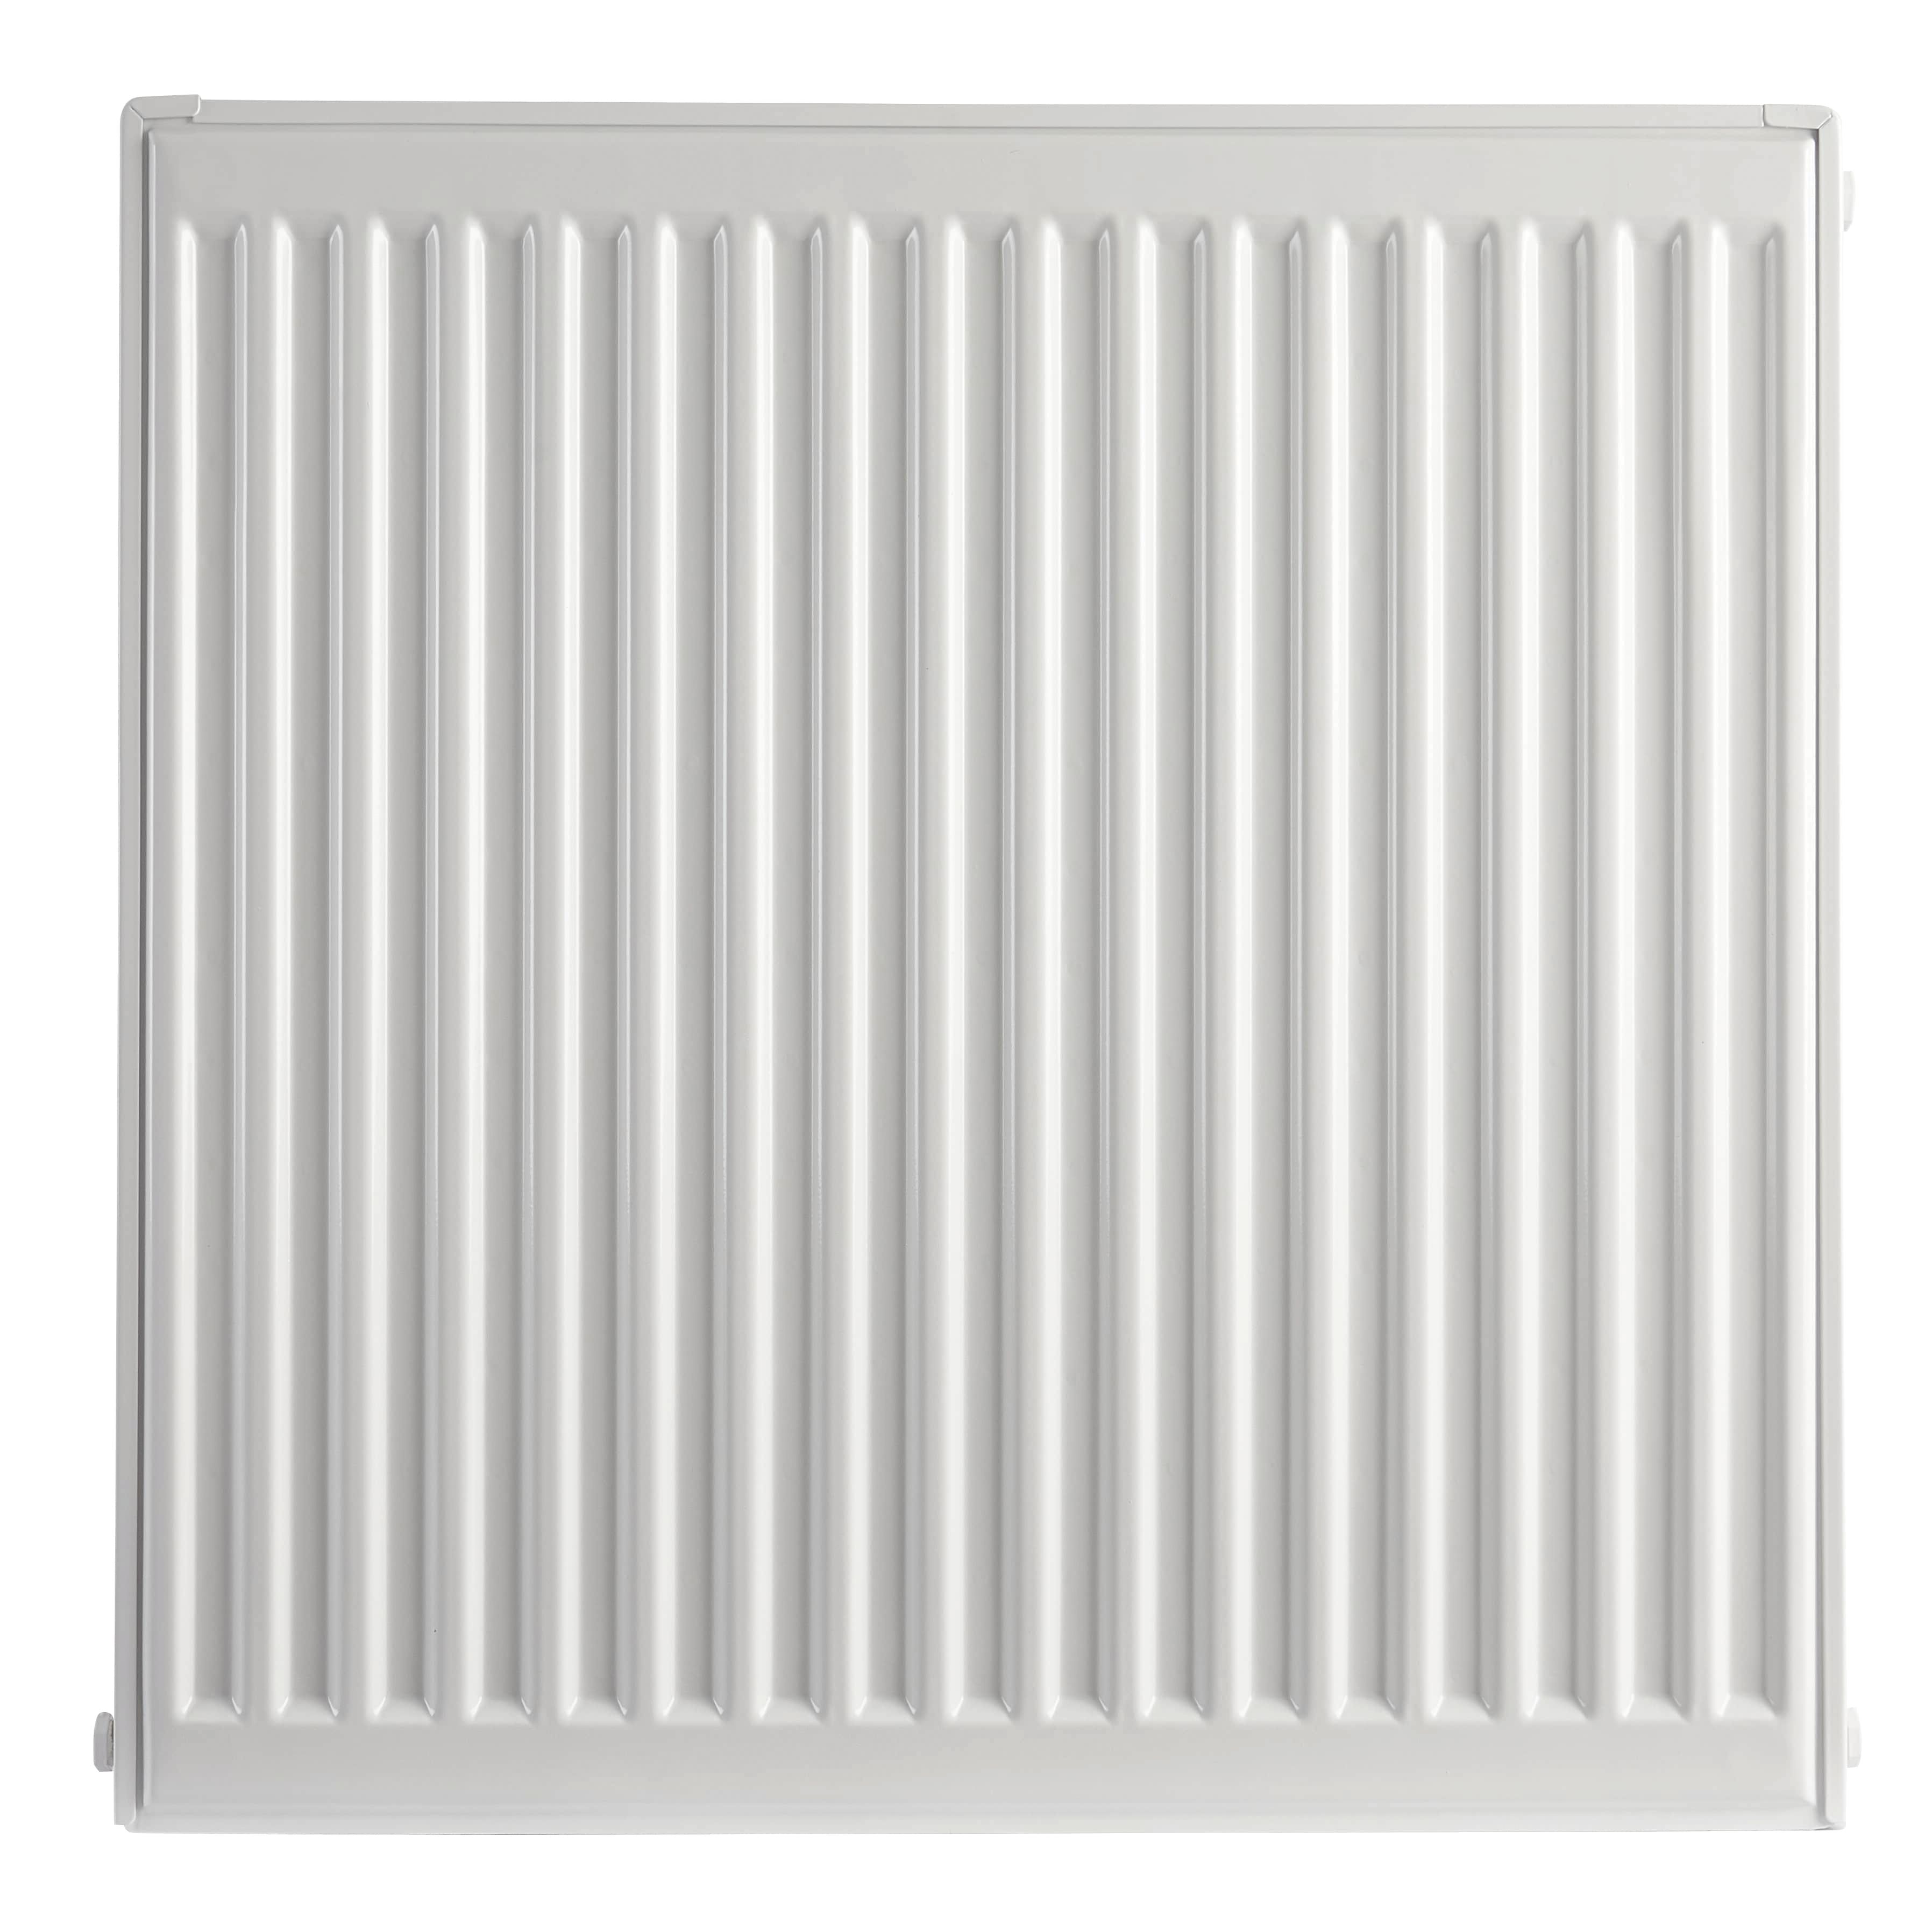 Image of Homeline by Stelrad 600 x 600mm Type 21 Double Panel Plus Single Convector Radiator